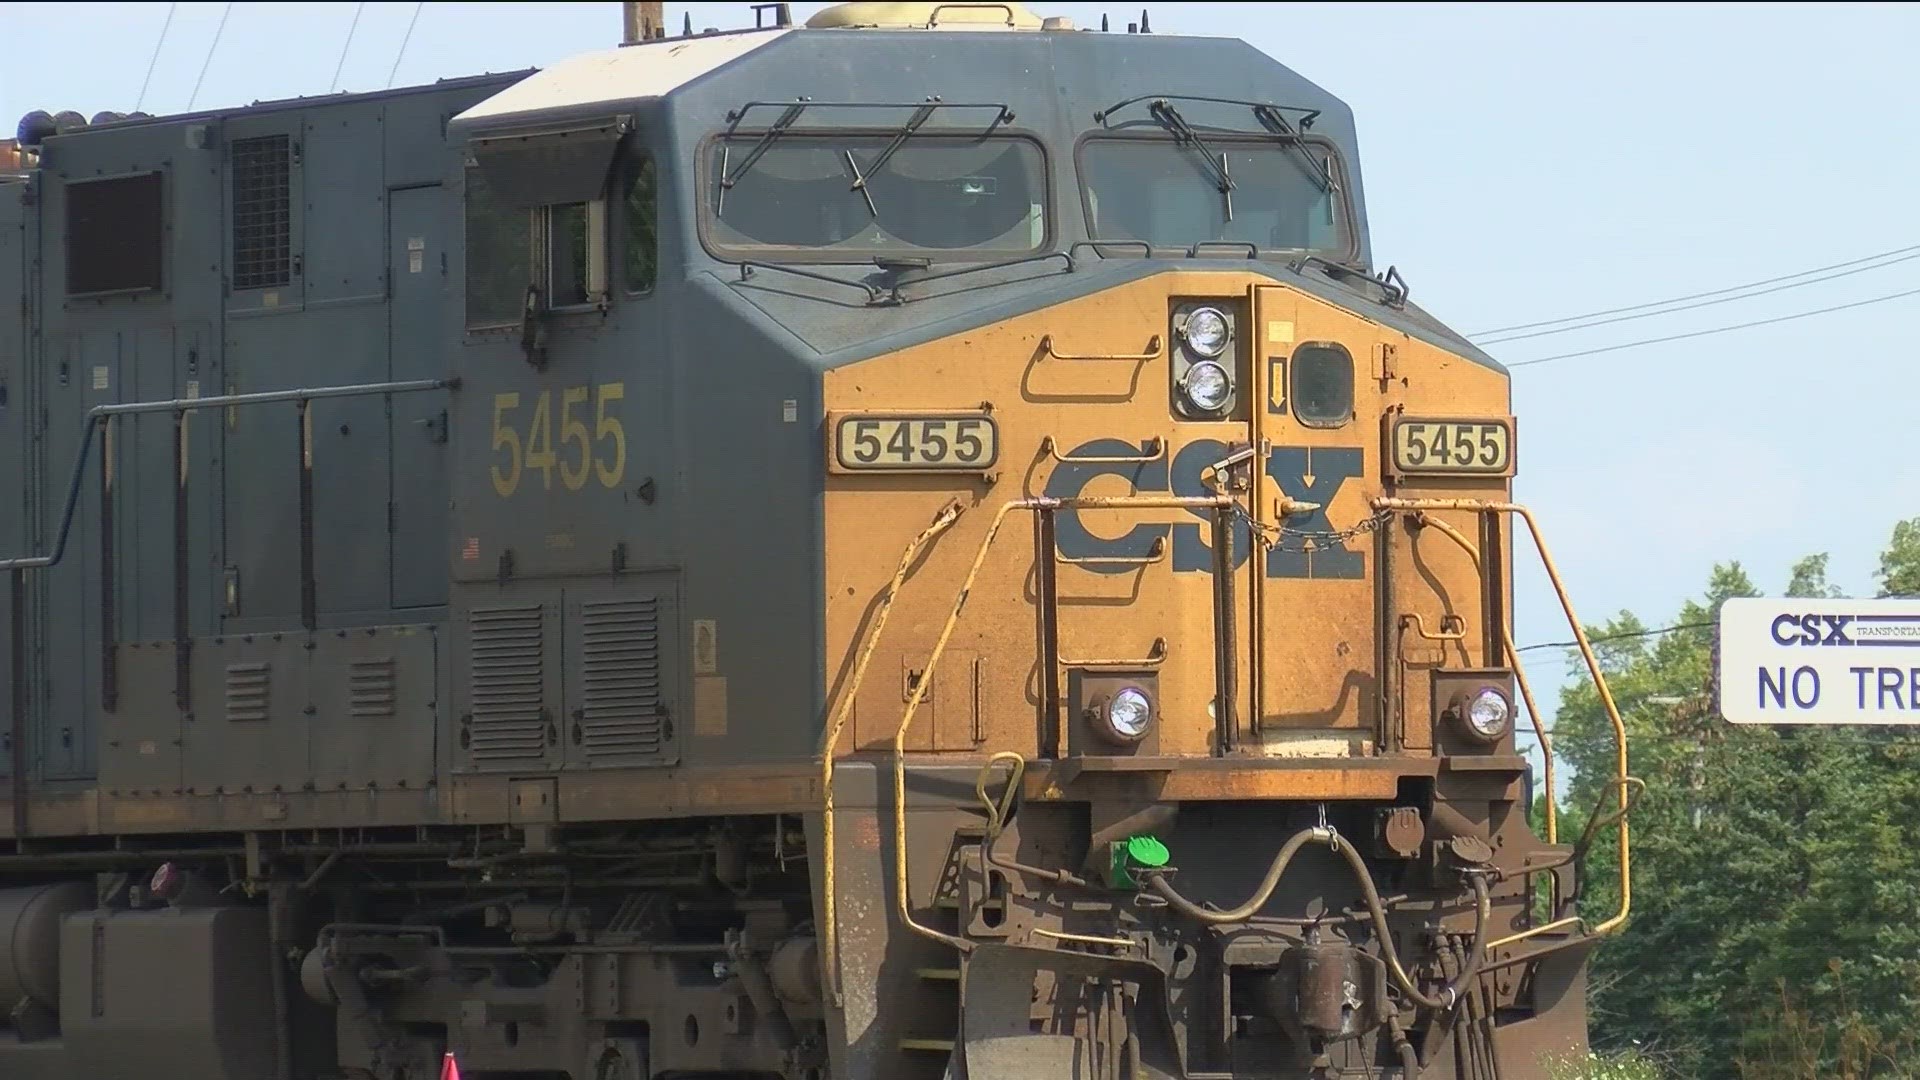 The 56-year-old man was fatally injured in a railyard just before 4 a.m. on Sunday, according to the National Transportation Safety Board.